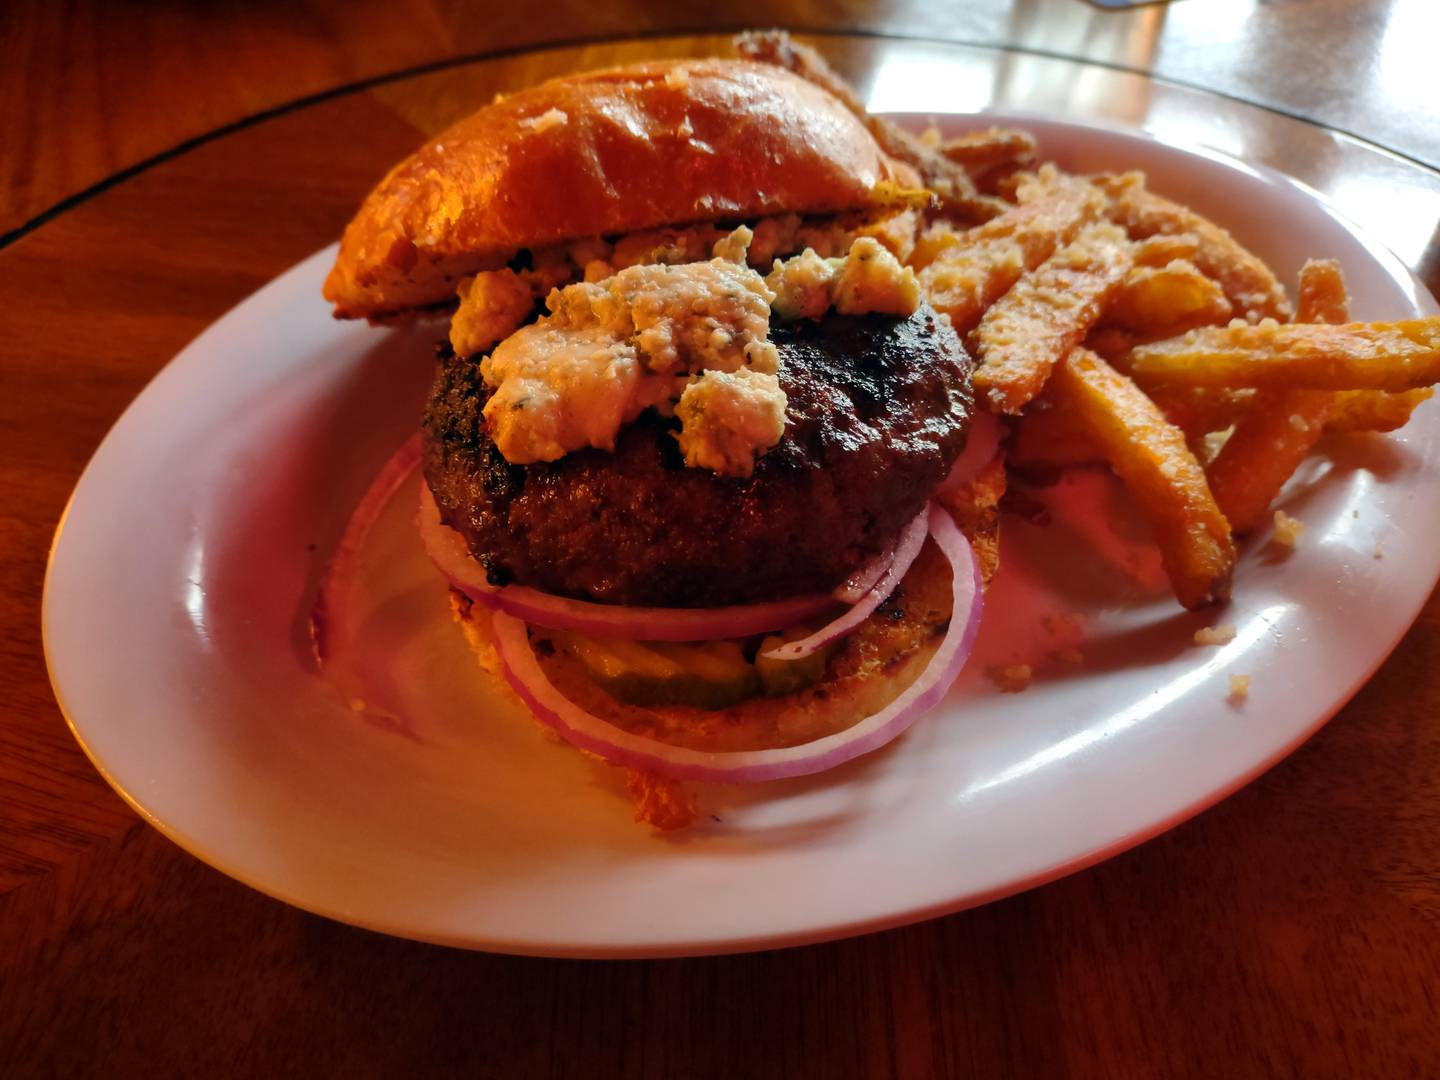 Tully Monster Pub & Grill's Rockin’ Rocky is a blackened Cajun-style burger with melted bleu cheese on a garlic-toasted bun. All burgers come with a side of fries that can be upgraded to garlic parmesan fries, a soup or a salad.